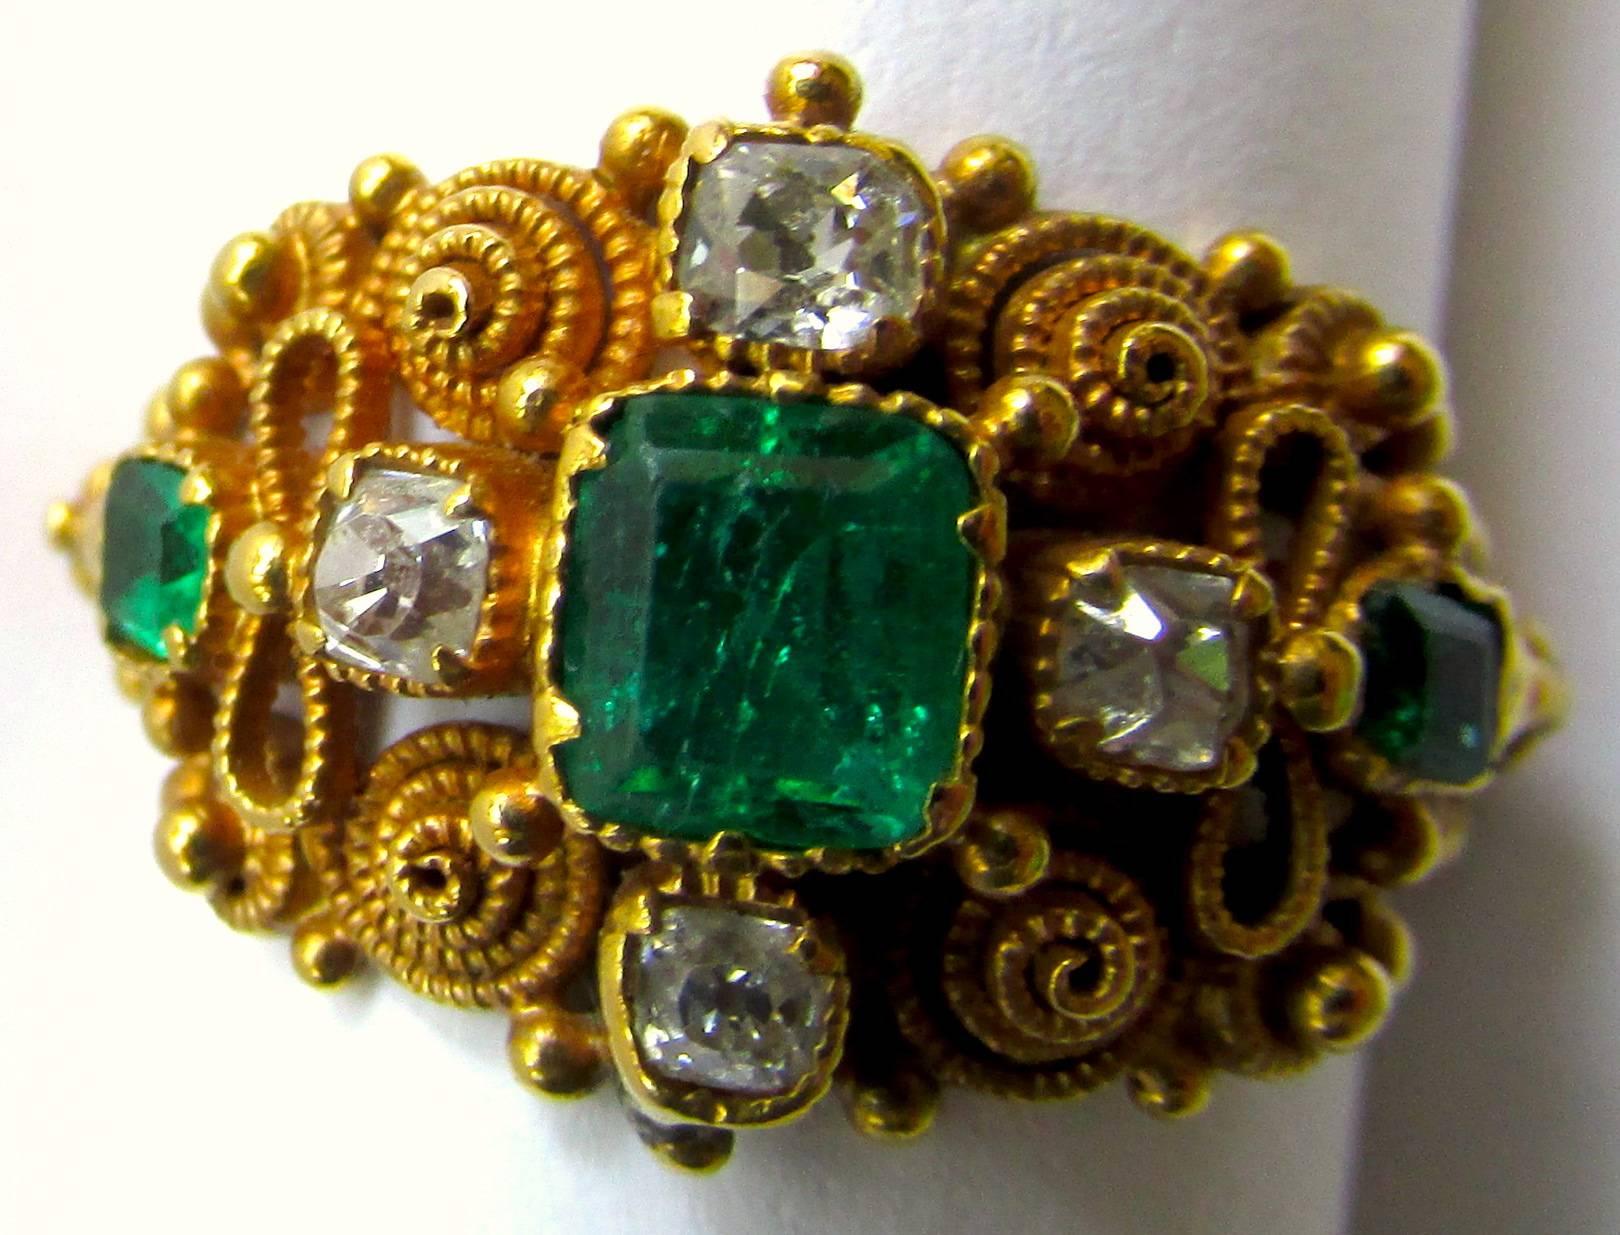 Georgian emerald and diamond ring in 15K yellow gold is exquisitely fashioned in cannetille work of twisted gold wire and tiny rosettes to resemble the gold lace of that period. The attention to detail is amazing, notice the elaborate band. The ring